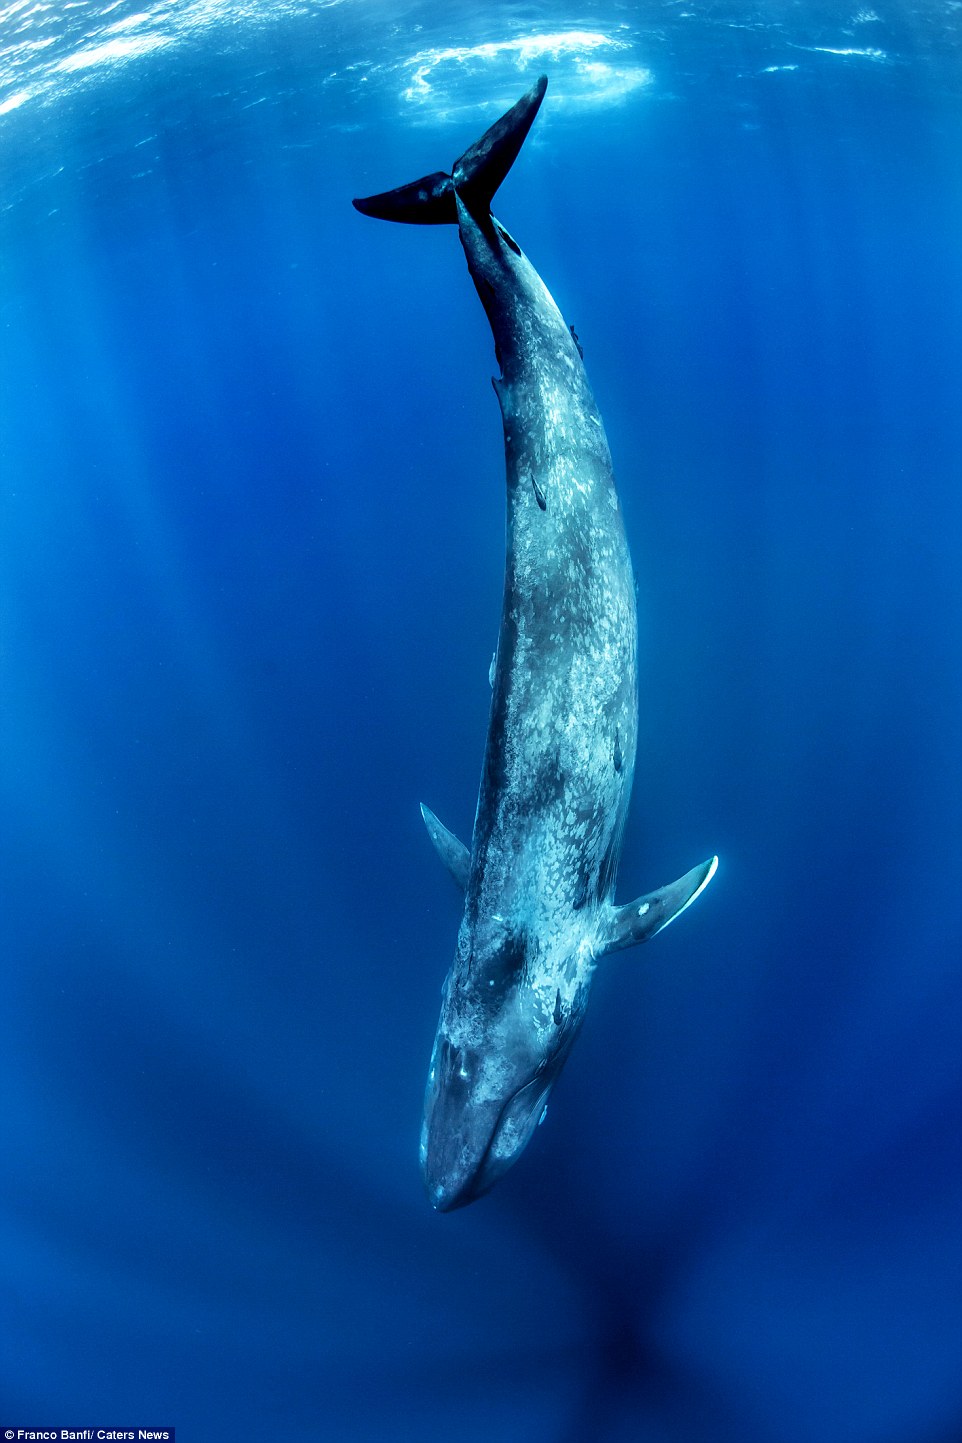 Having a whale of a time: The beautiful images show the whale plunging into the deepest depths of the clear blue sea